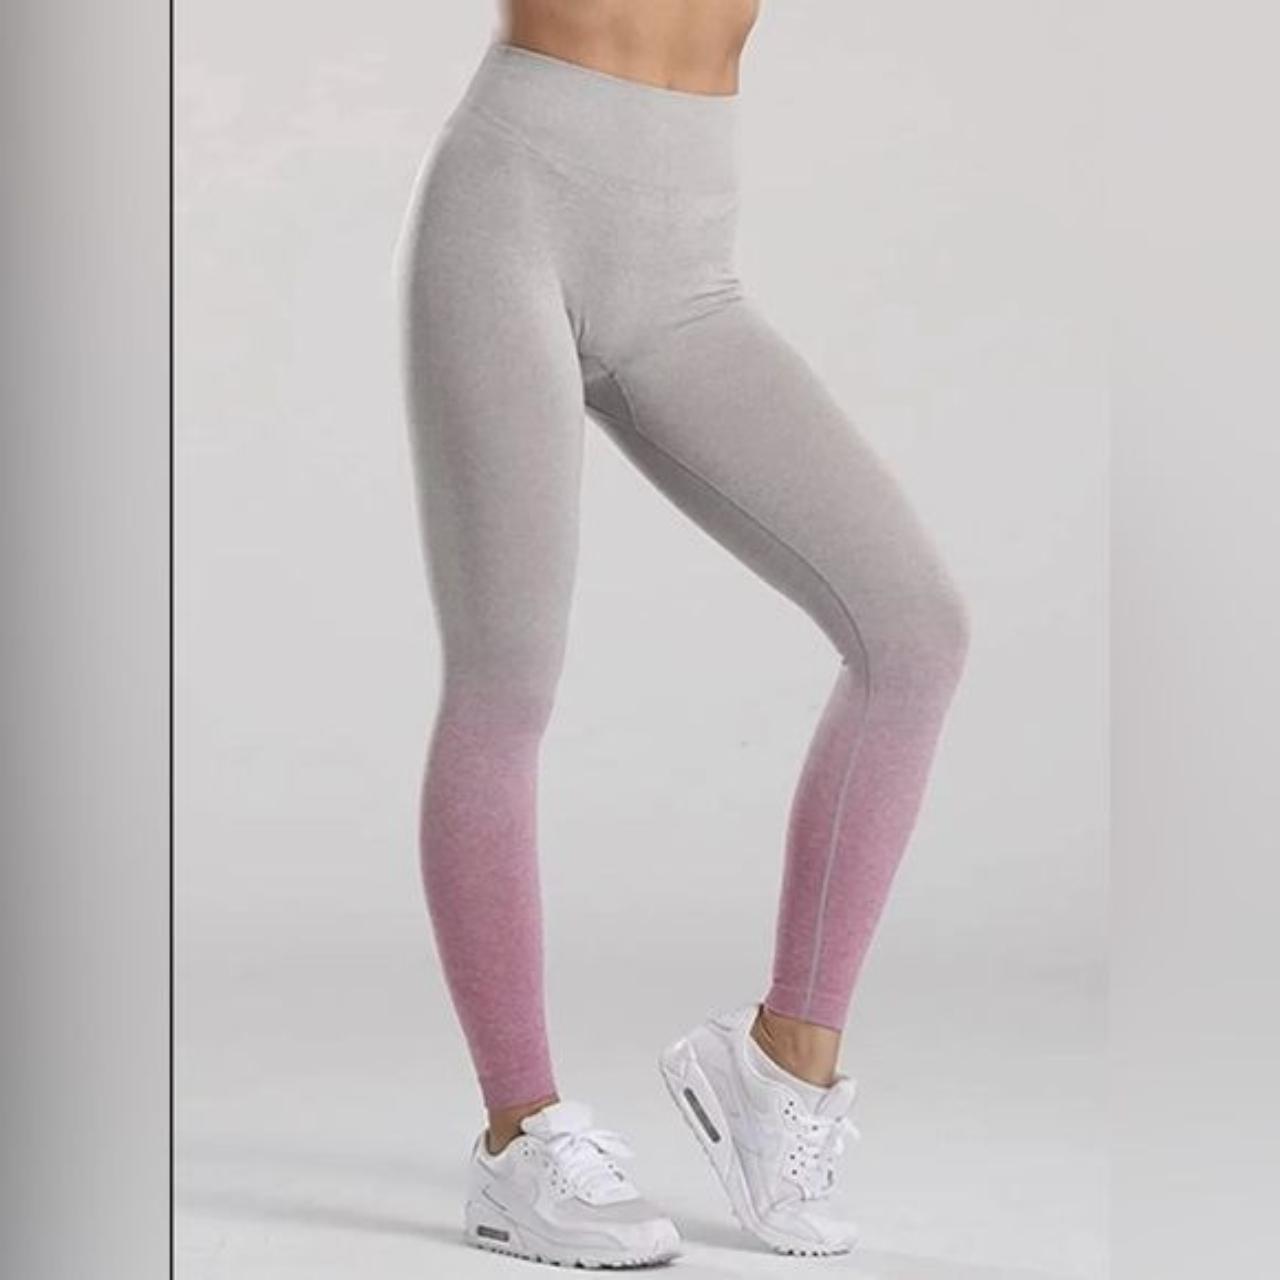 GYMSHARK ADAPT OMBRE Seamless Leggings Womens READ Gray Pink Gym Training  Yoga $6.98 - PicClick